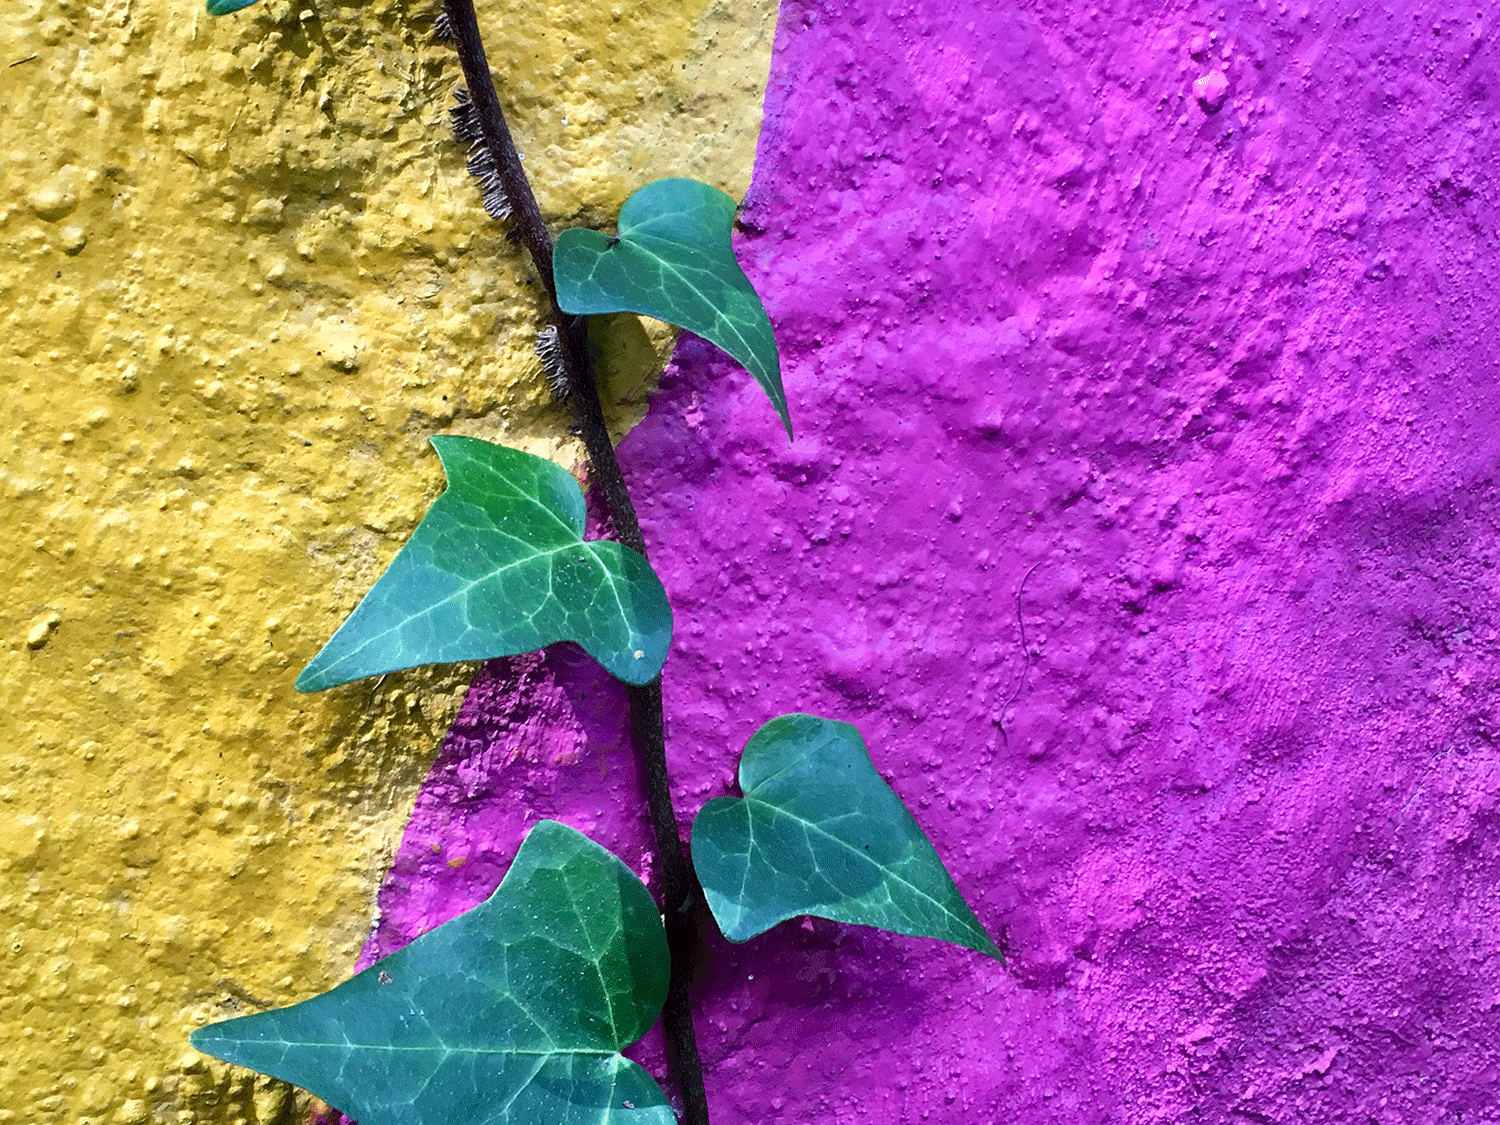 A green vine growing on a yellow and purple wall